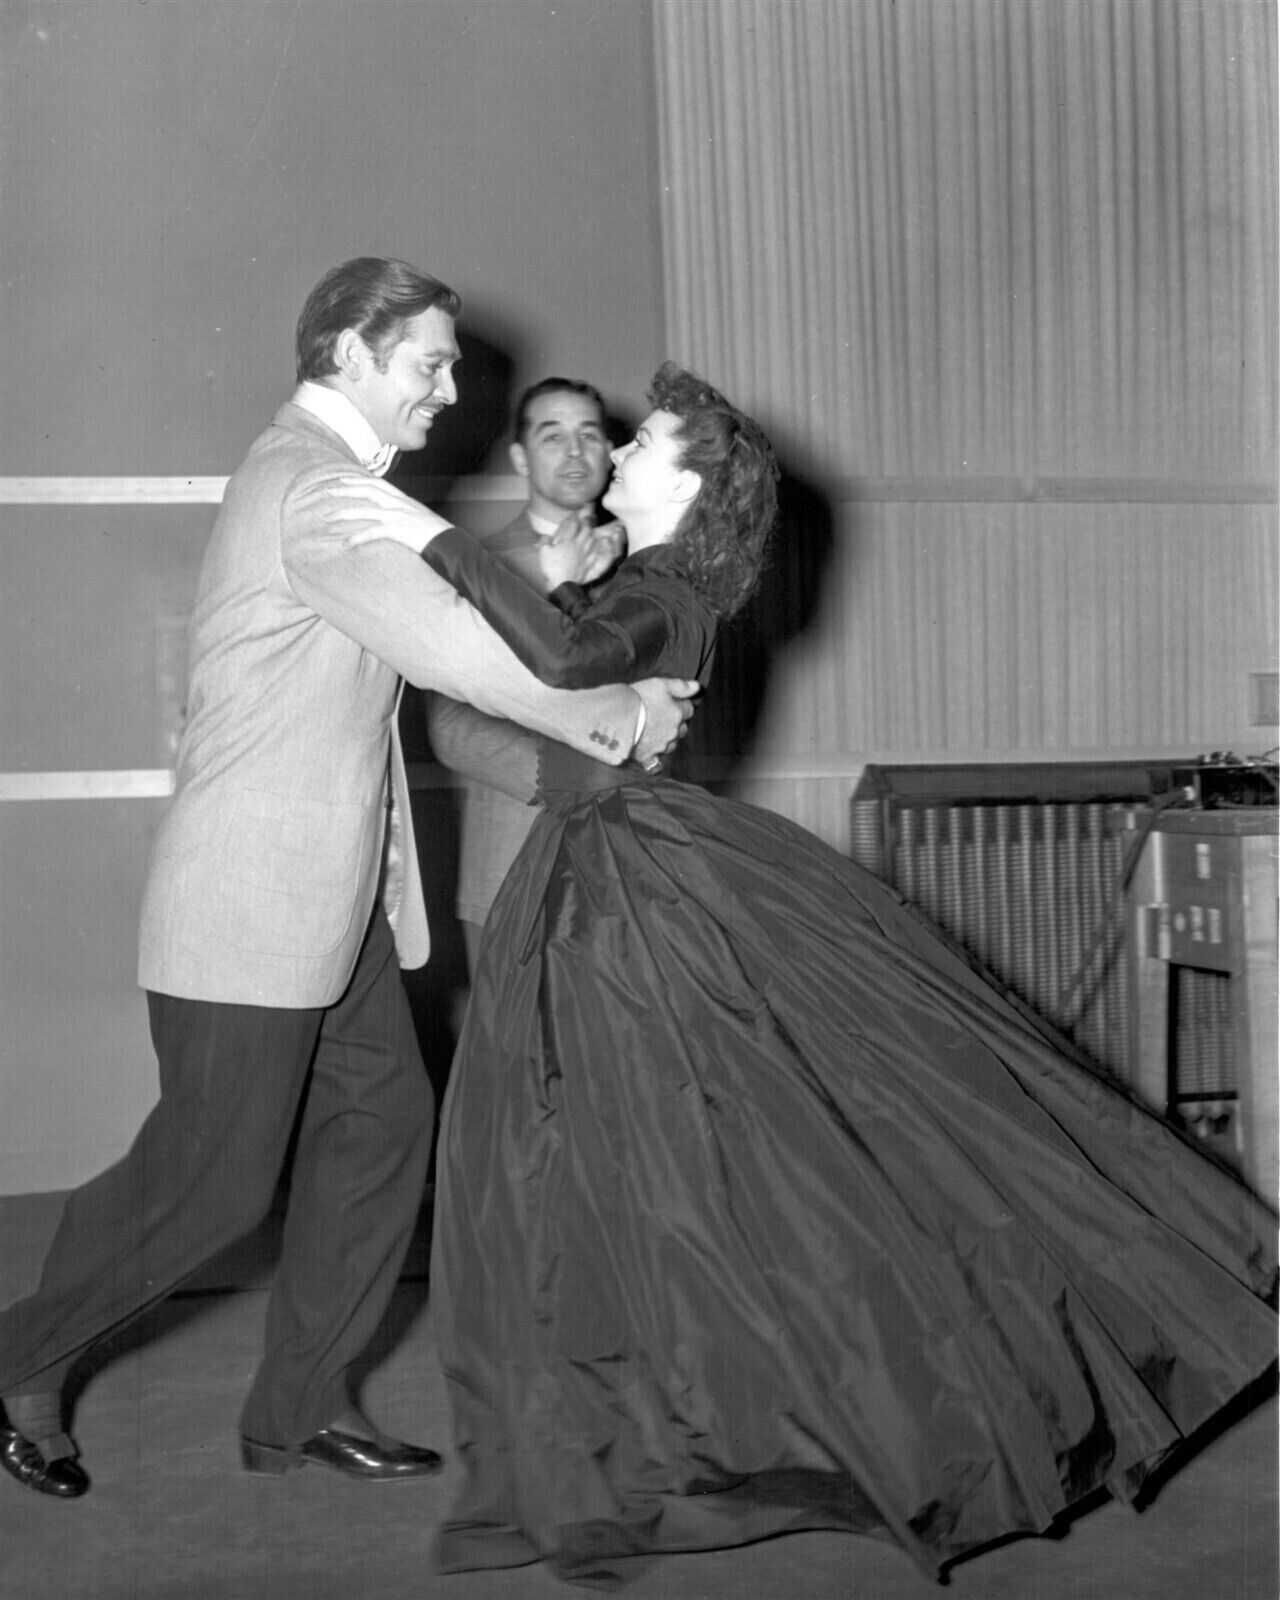 Gone With The Wind Clark Gable & Vivien Leigh rehearse for dance 5x7 inch photo